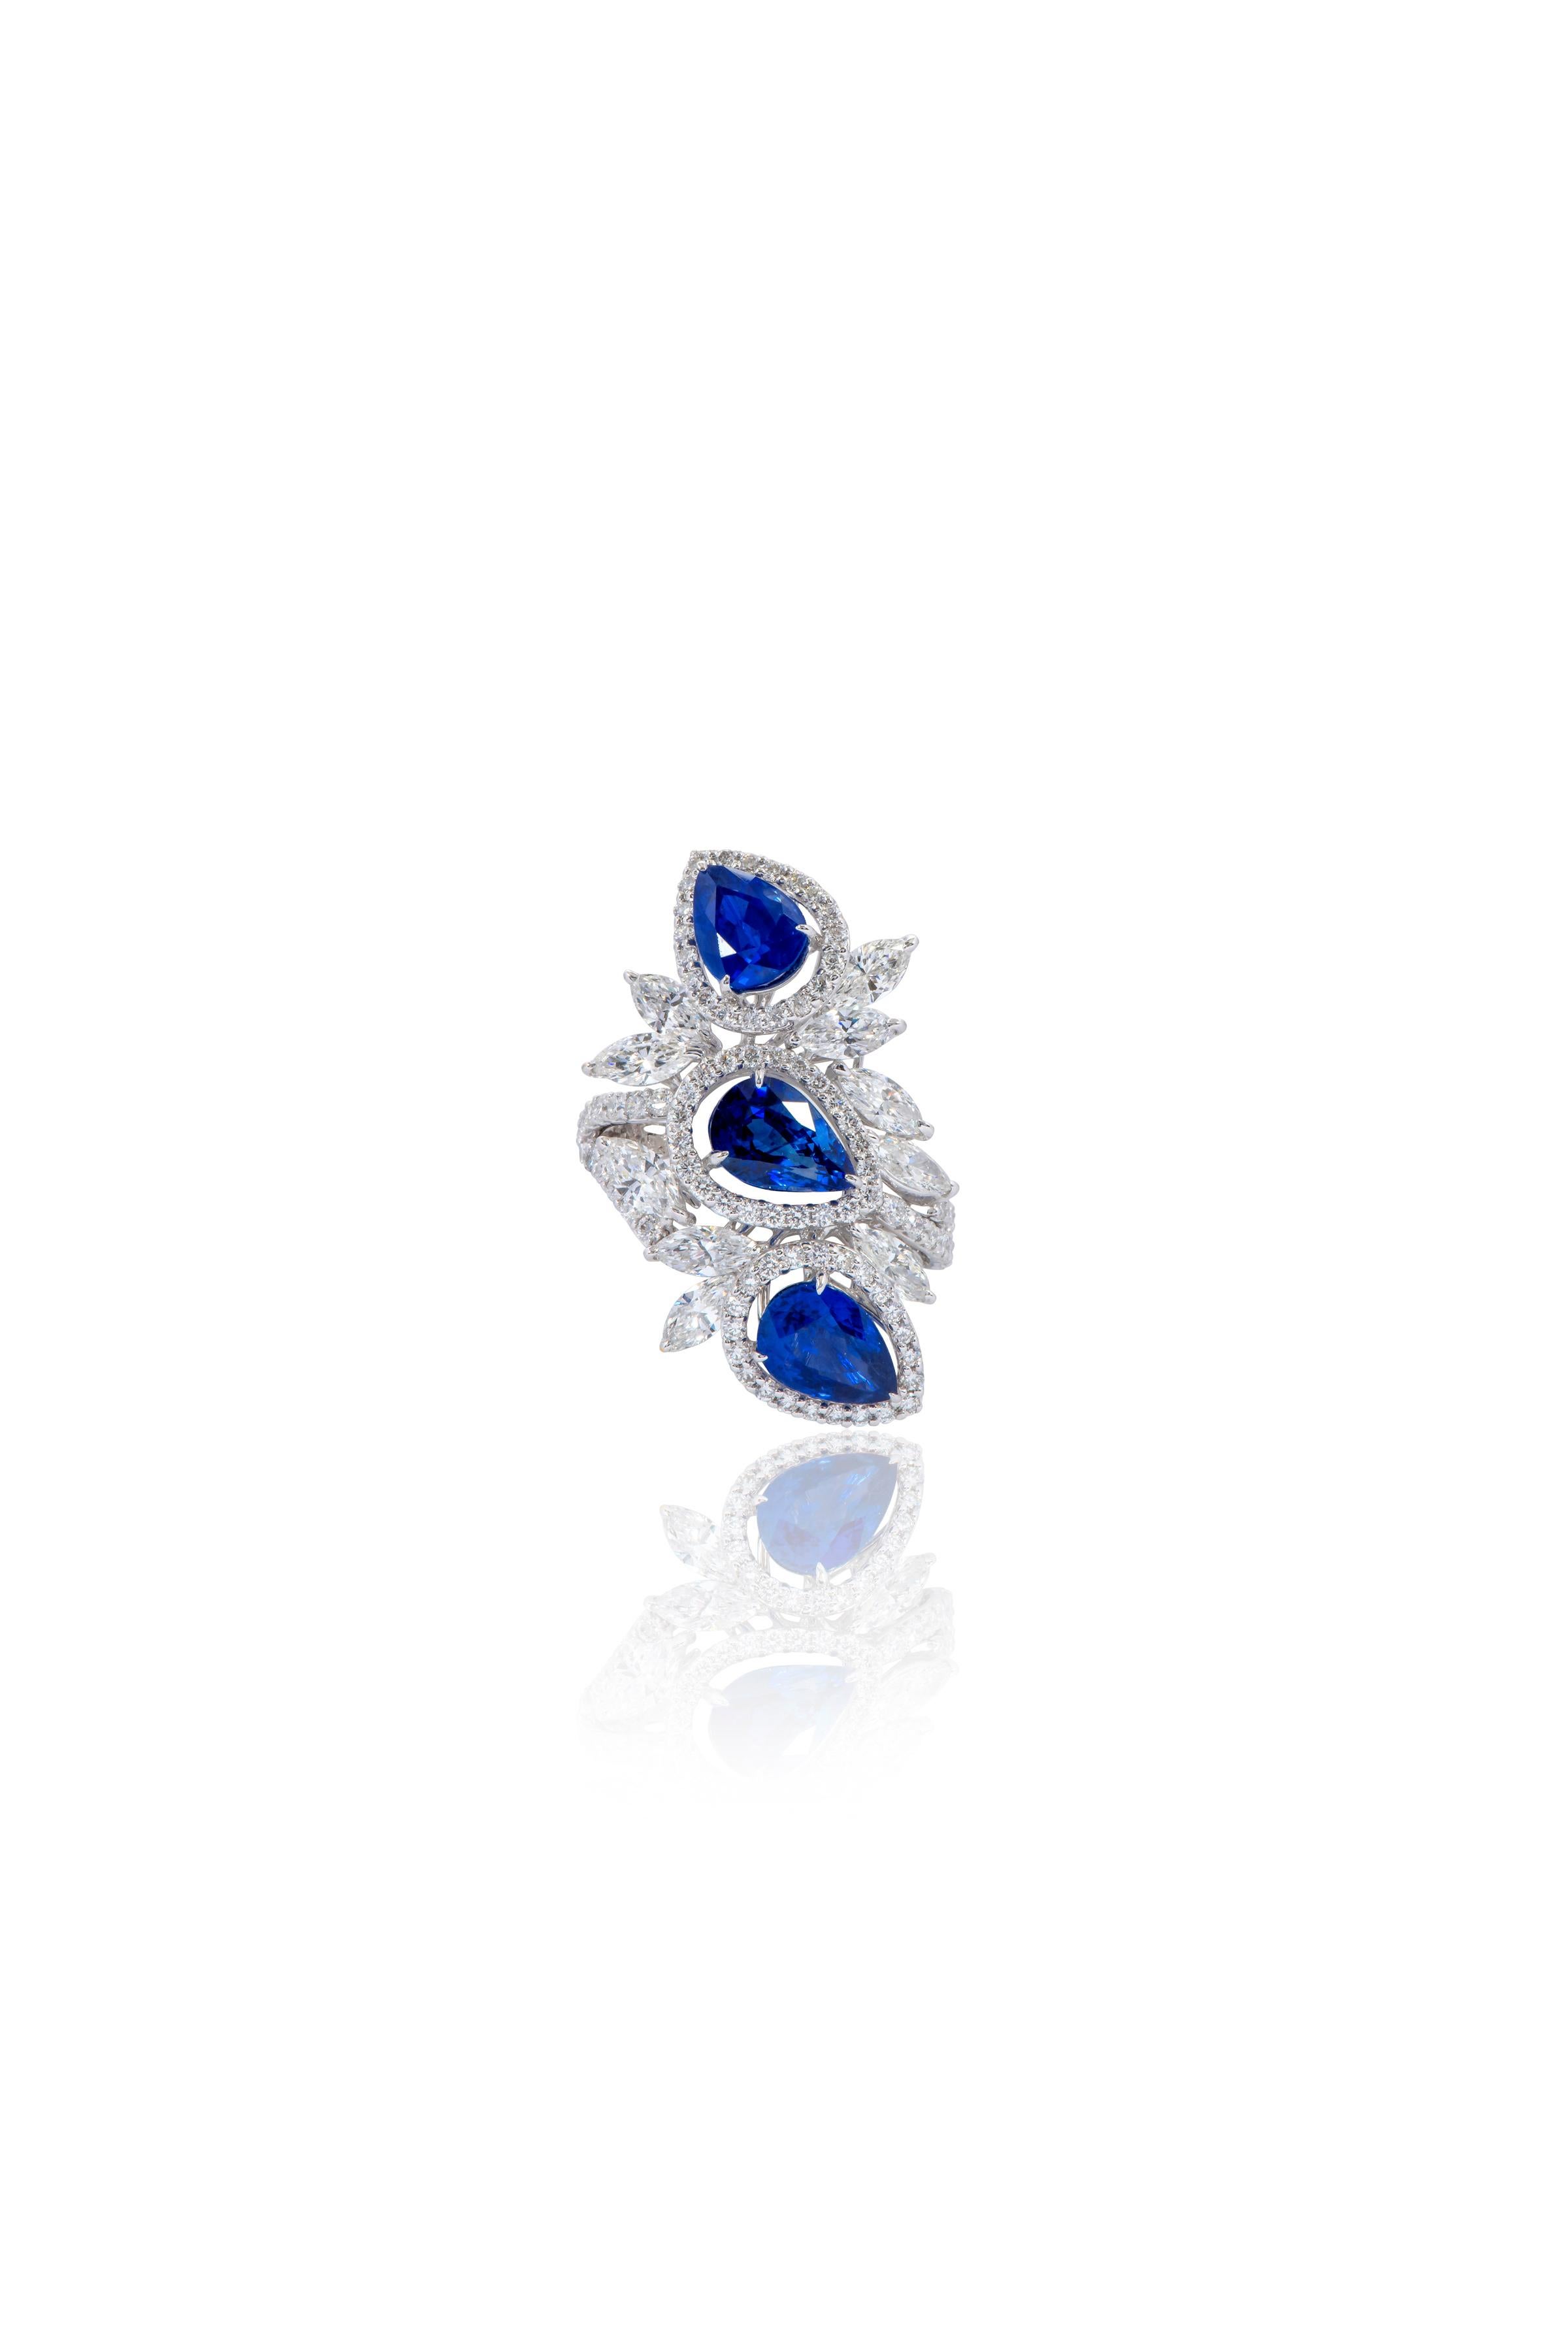 Women's 18 Karat White Gold 5.43 Carat Sapphire and Diamond Cocktail Ring For Sale